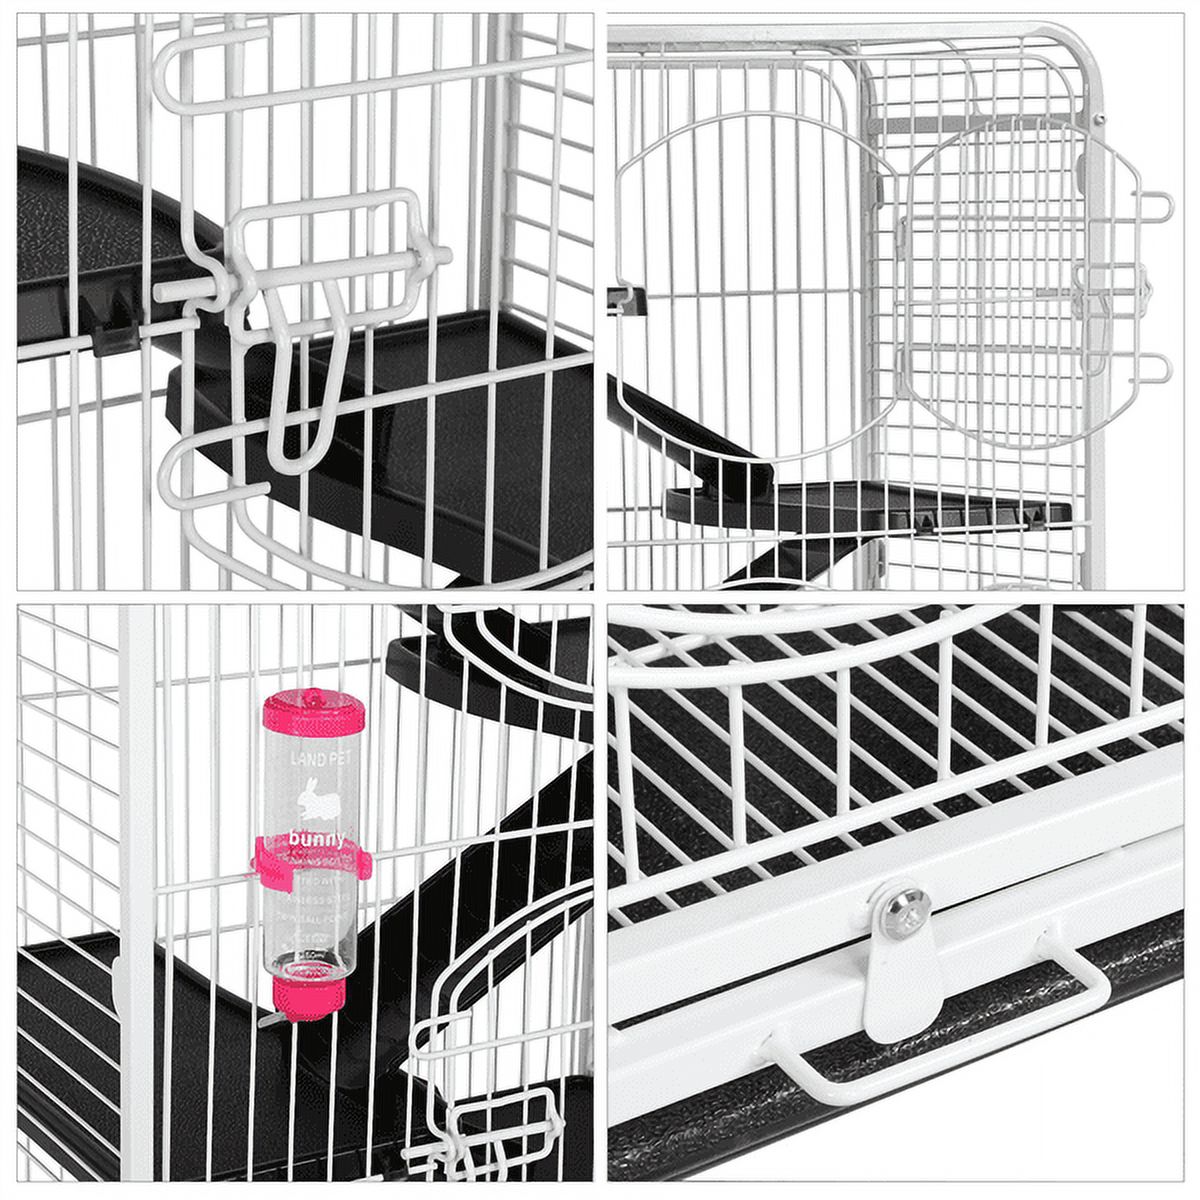 Alden Design 6 Level Rolling Large Pet Cage with 3 Doors, Pet Bowl, and Water Bottle for Small Animals, White - image 3 of 9